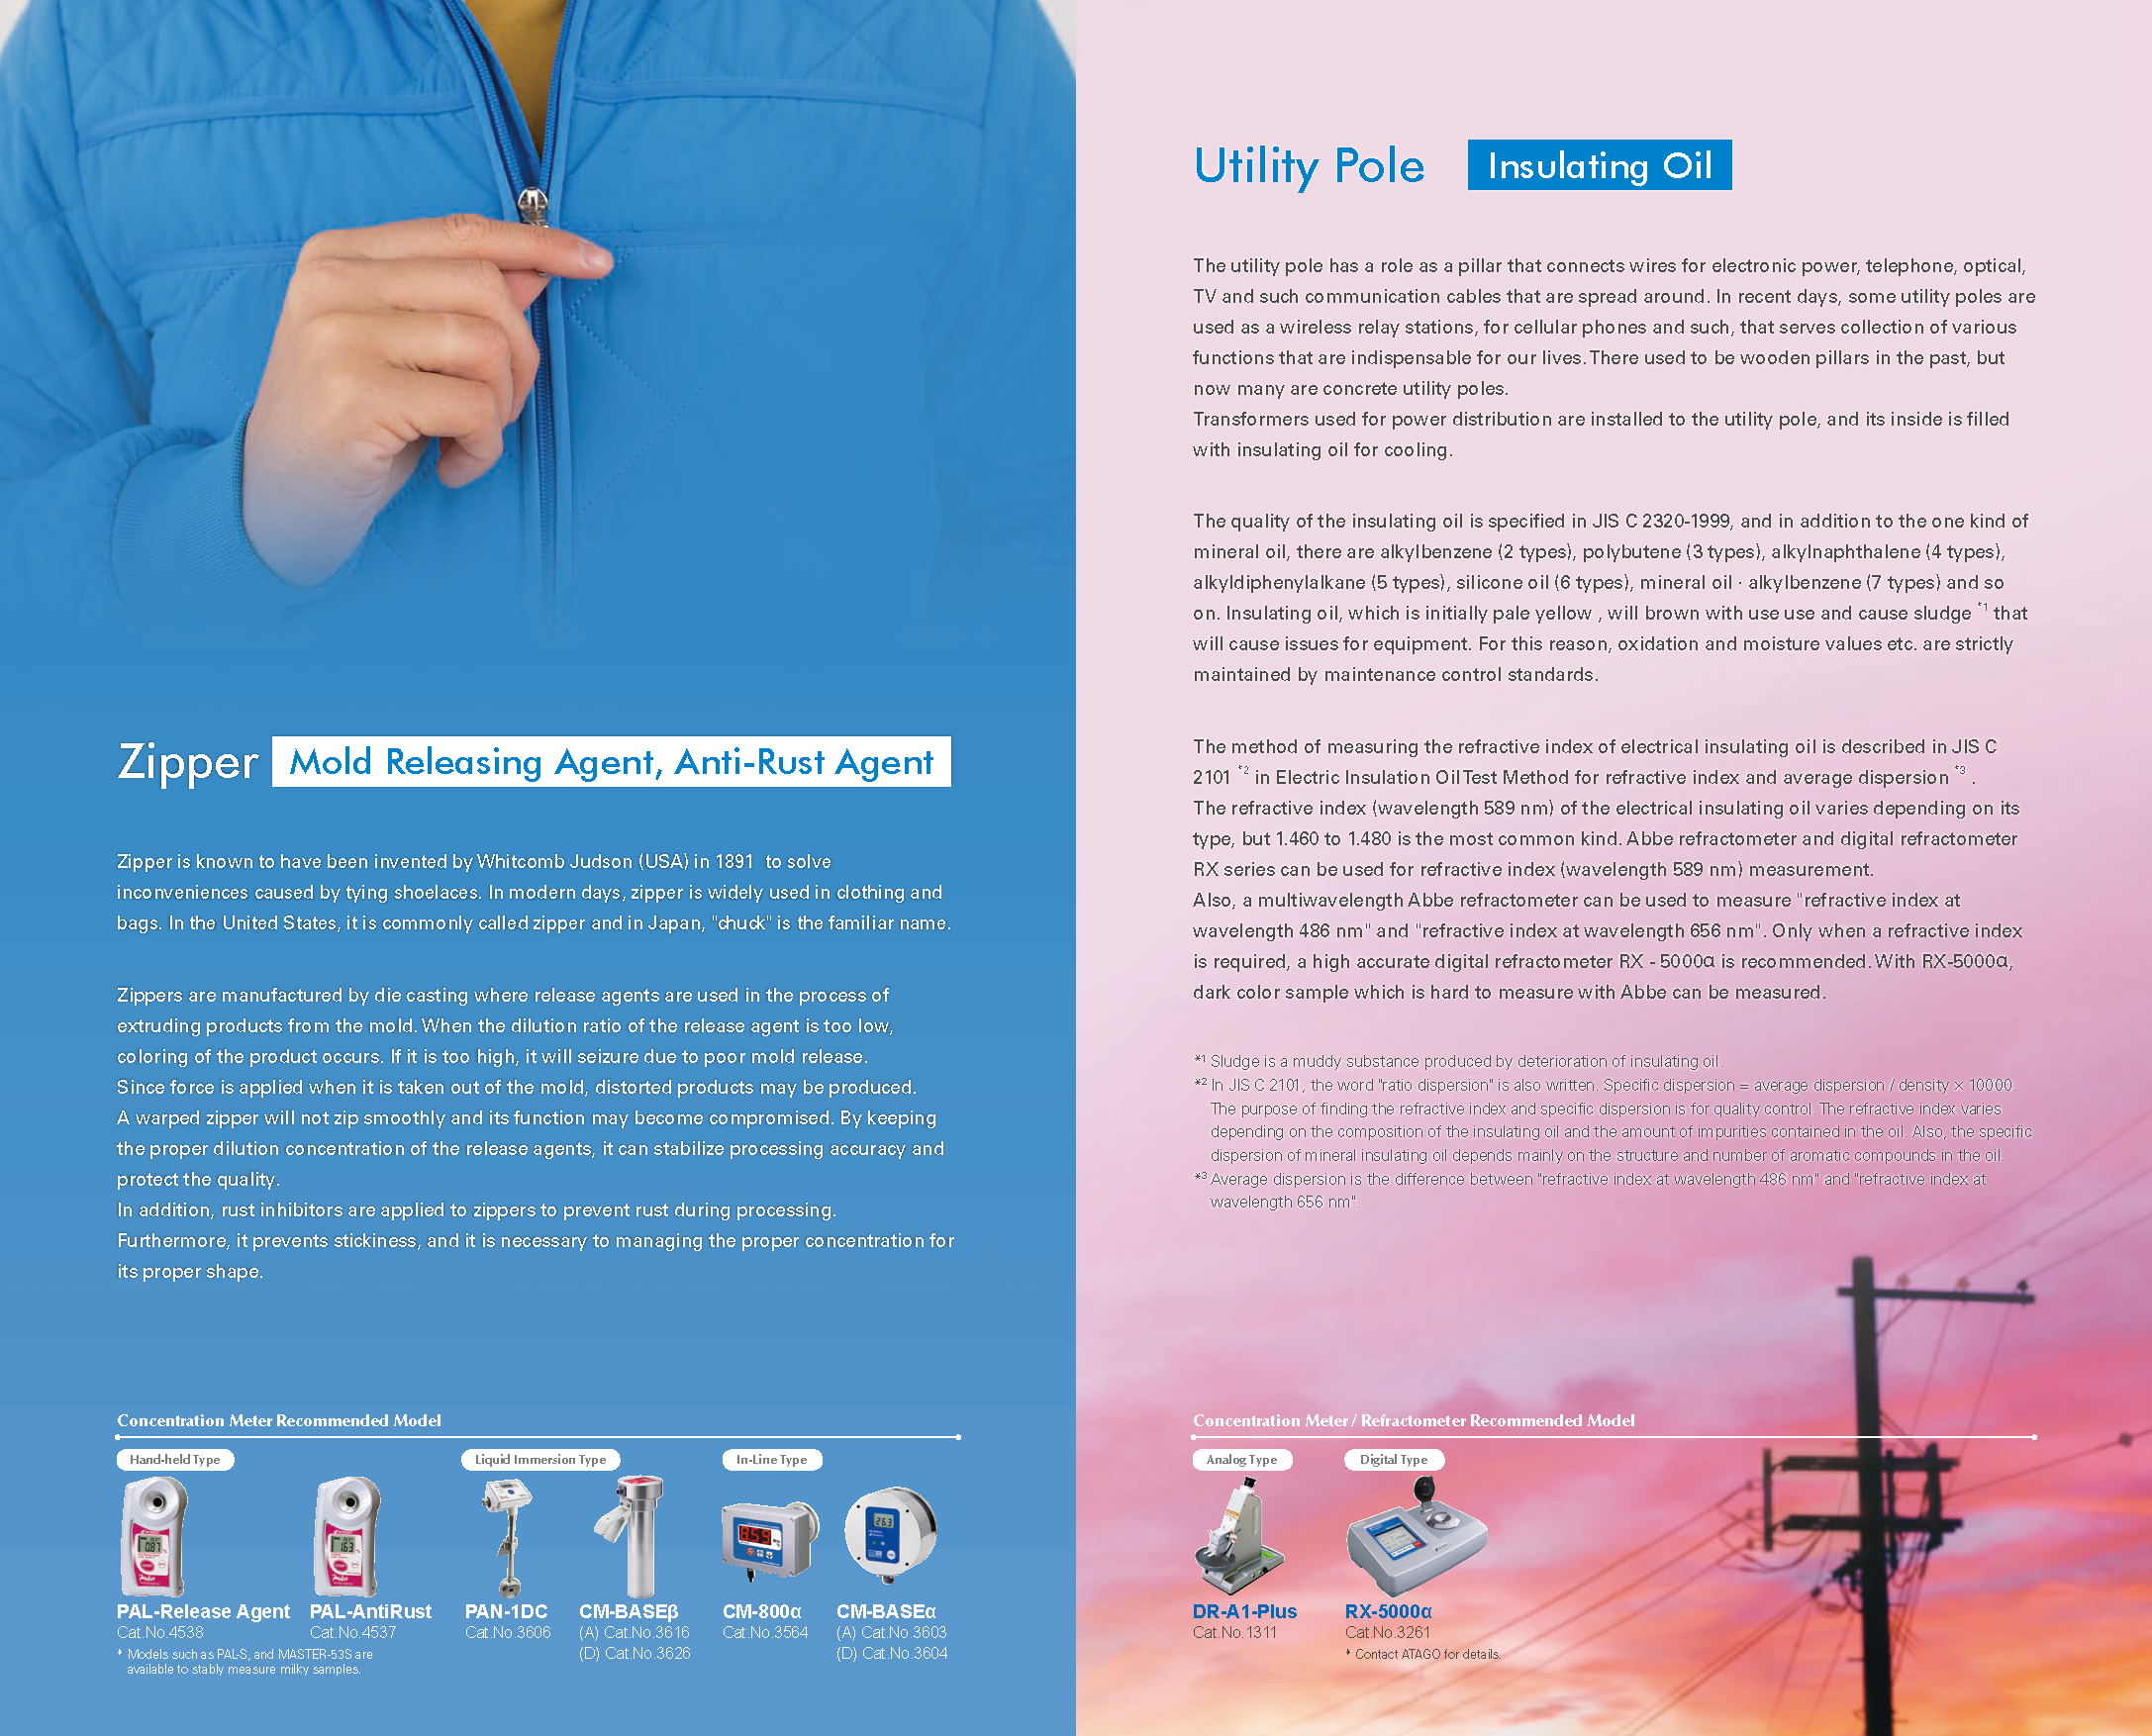 Zipper[Mold Releasing Agent, Anti-Rust Agent] / Utility Pole[Insulating Oil]